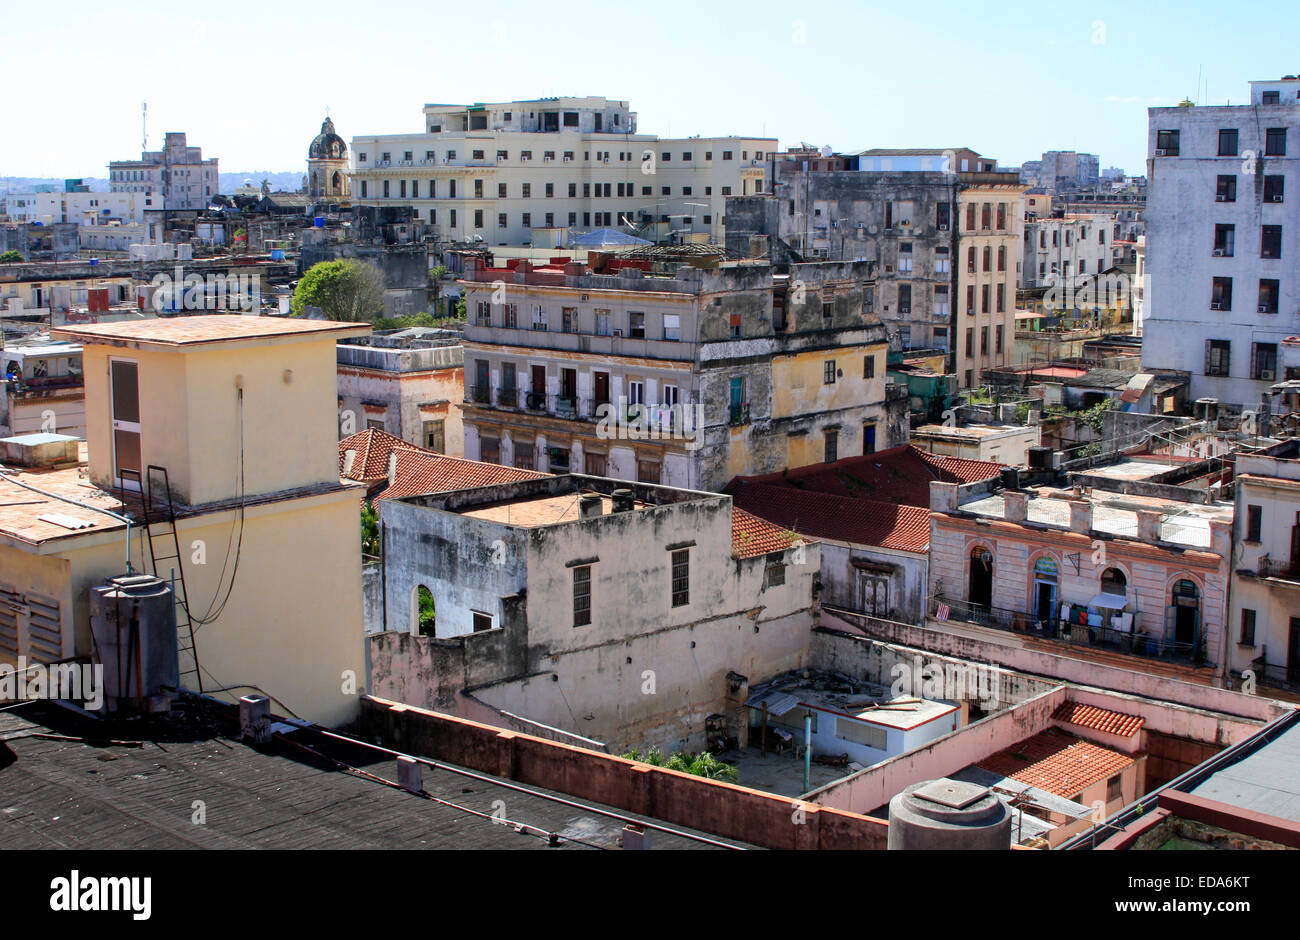 The view across Havana from the rooftop bar at Hotel Ambos Mundos in Cuba Stock Photo